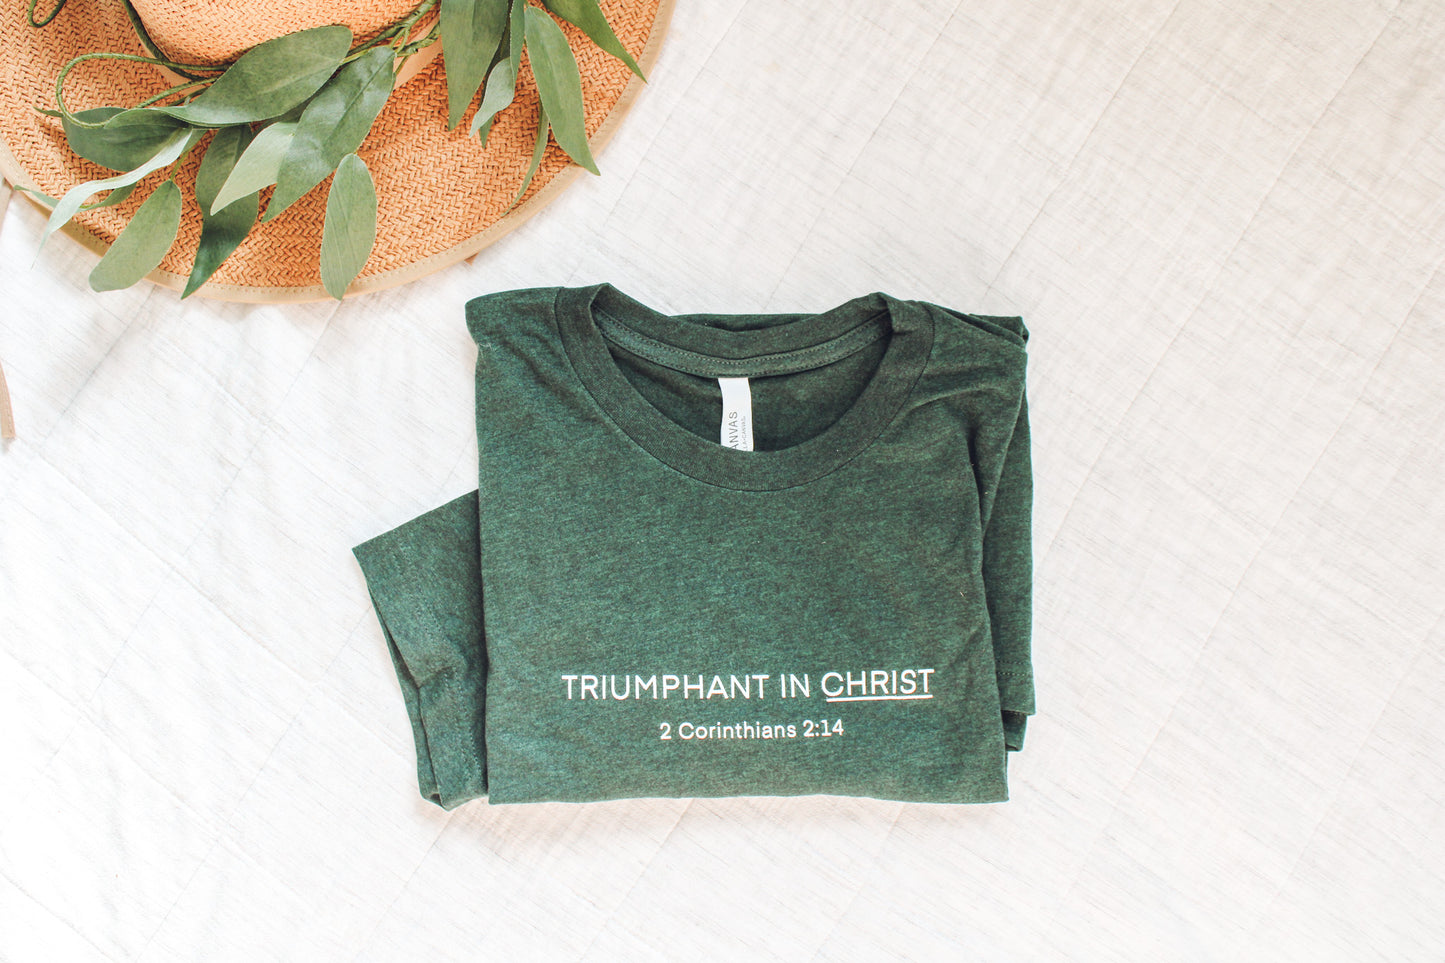 Triumphant in Christ UNISEX Short-Sleeve T-Shirt (Color: Heathered Emerald)